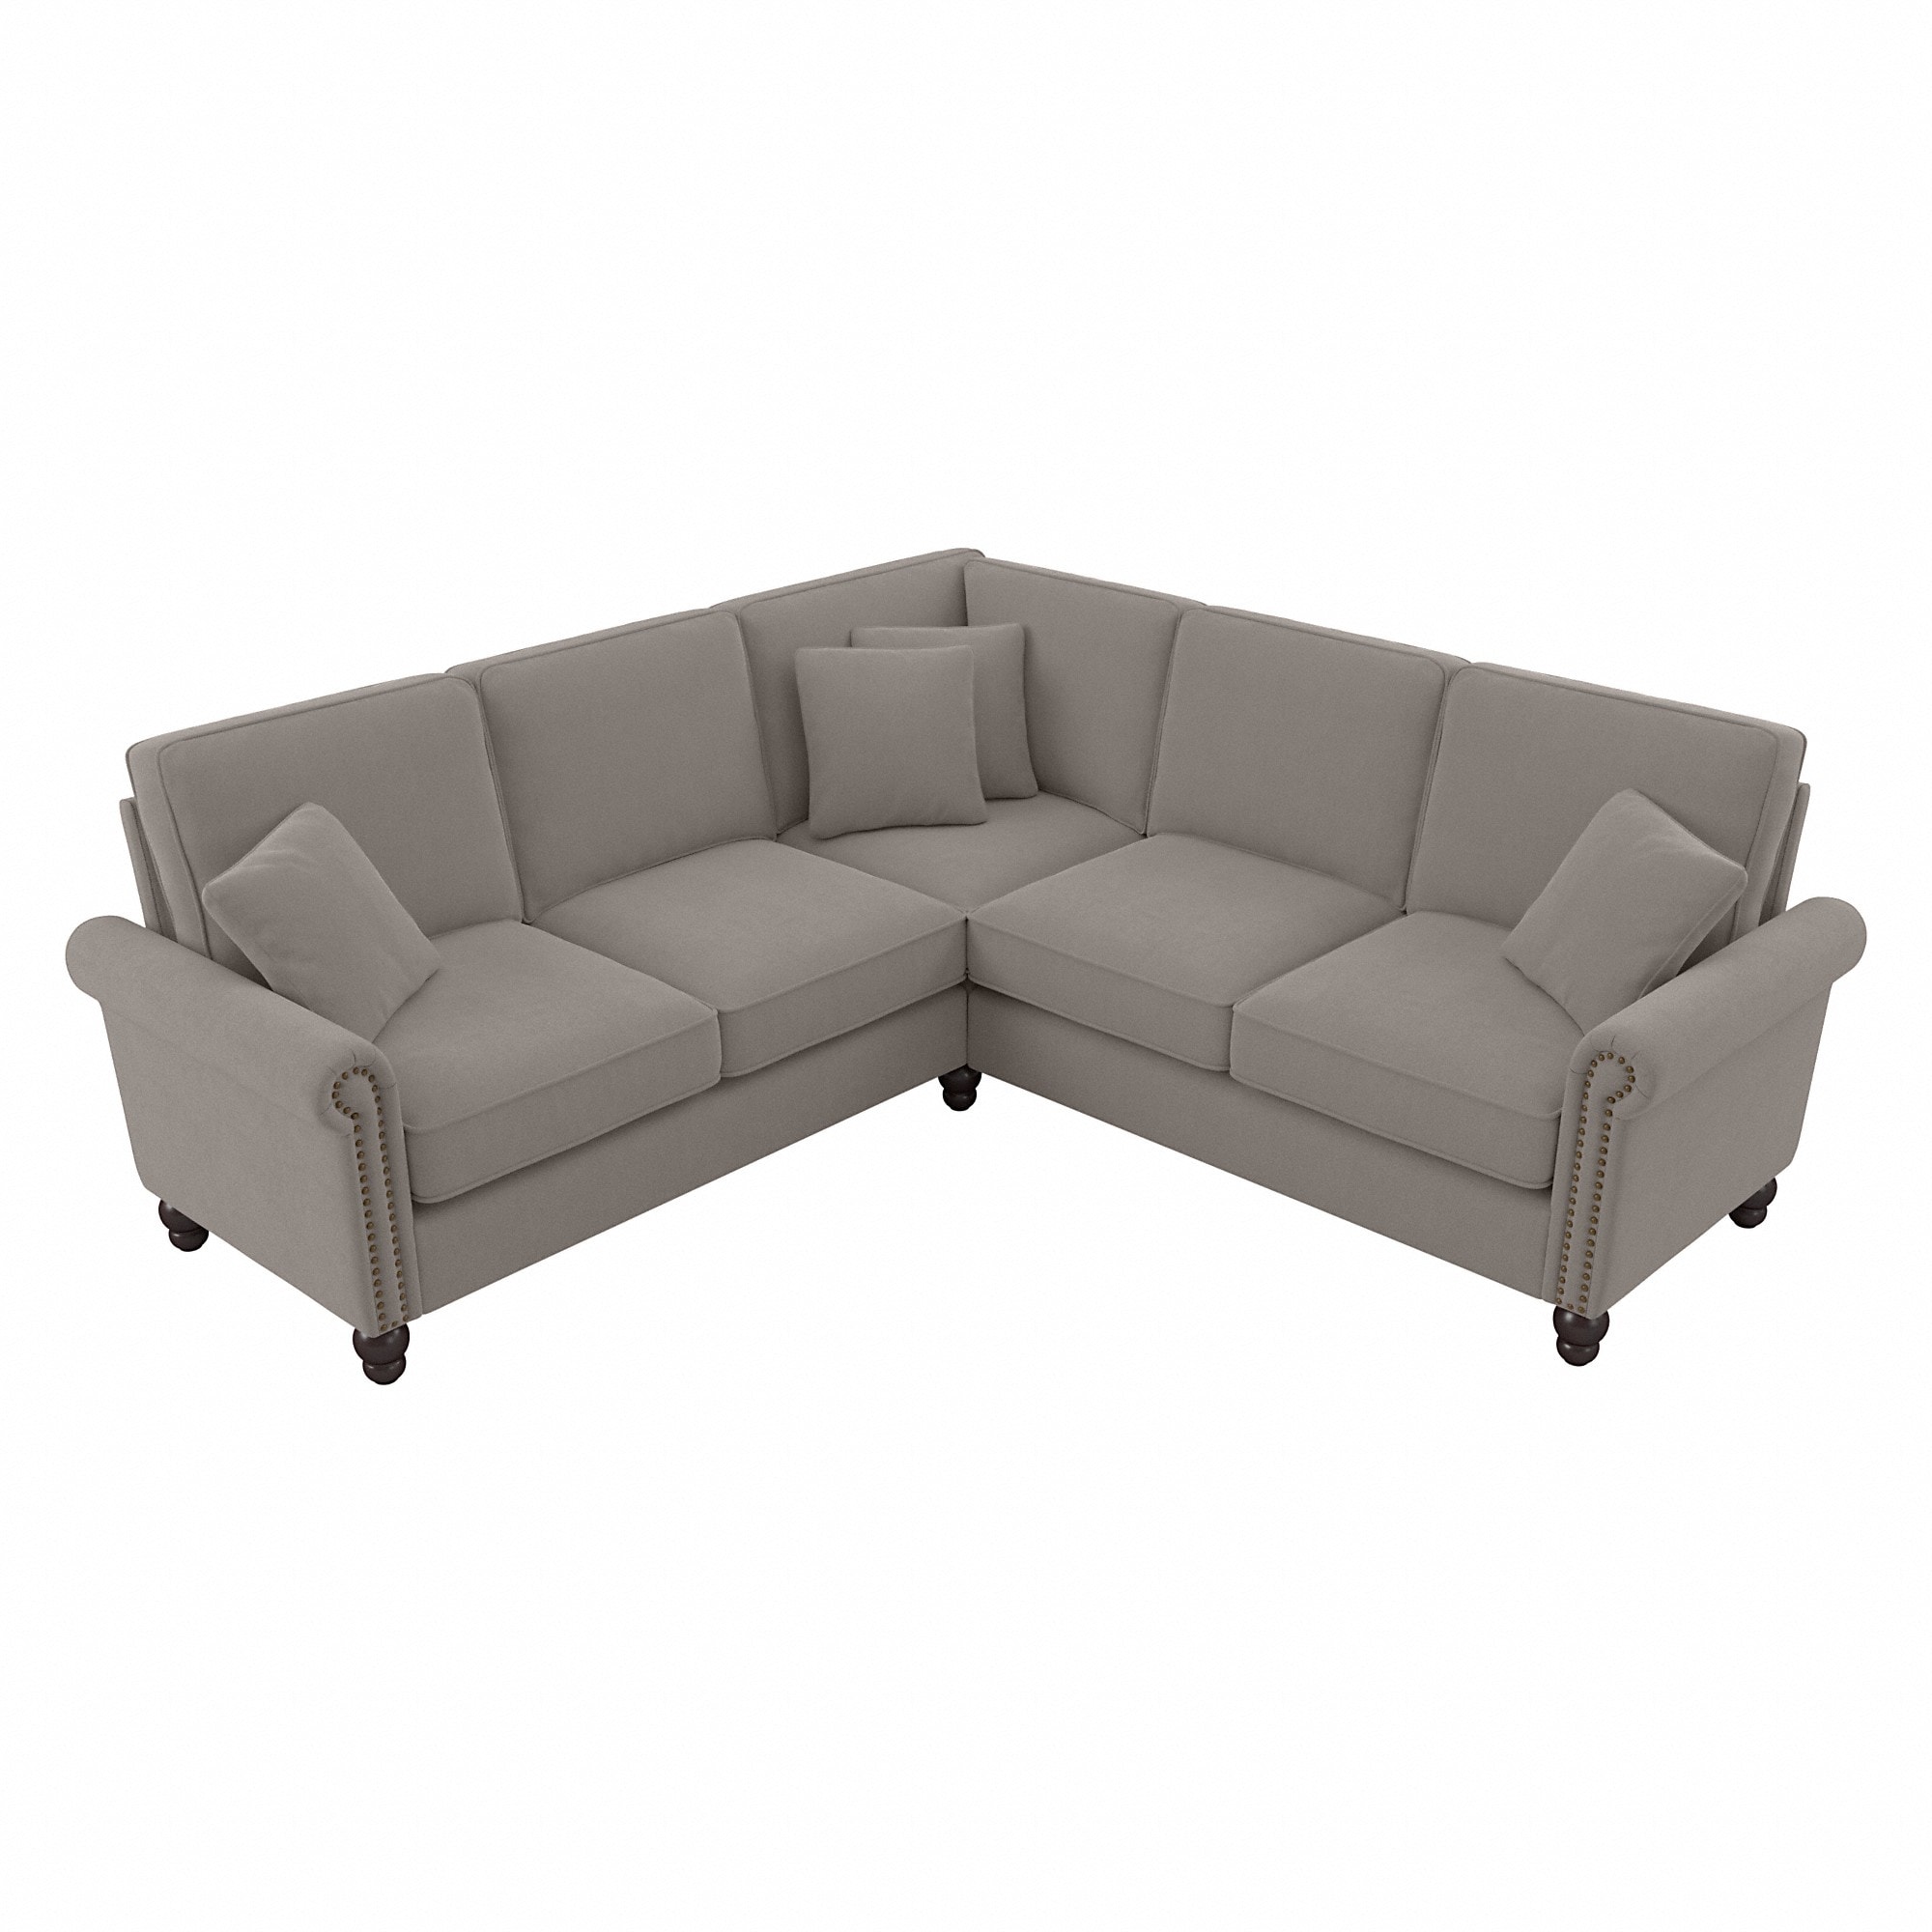 Bush Furniture Coventry 87W L Shaped Sectional Couch by